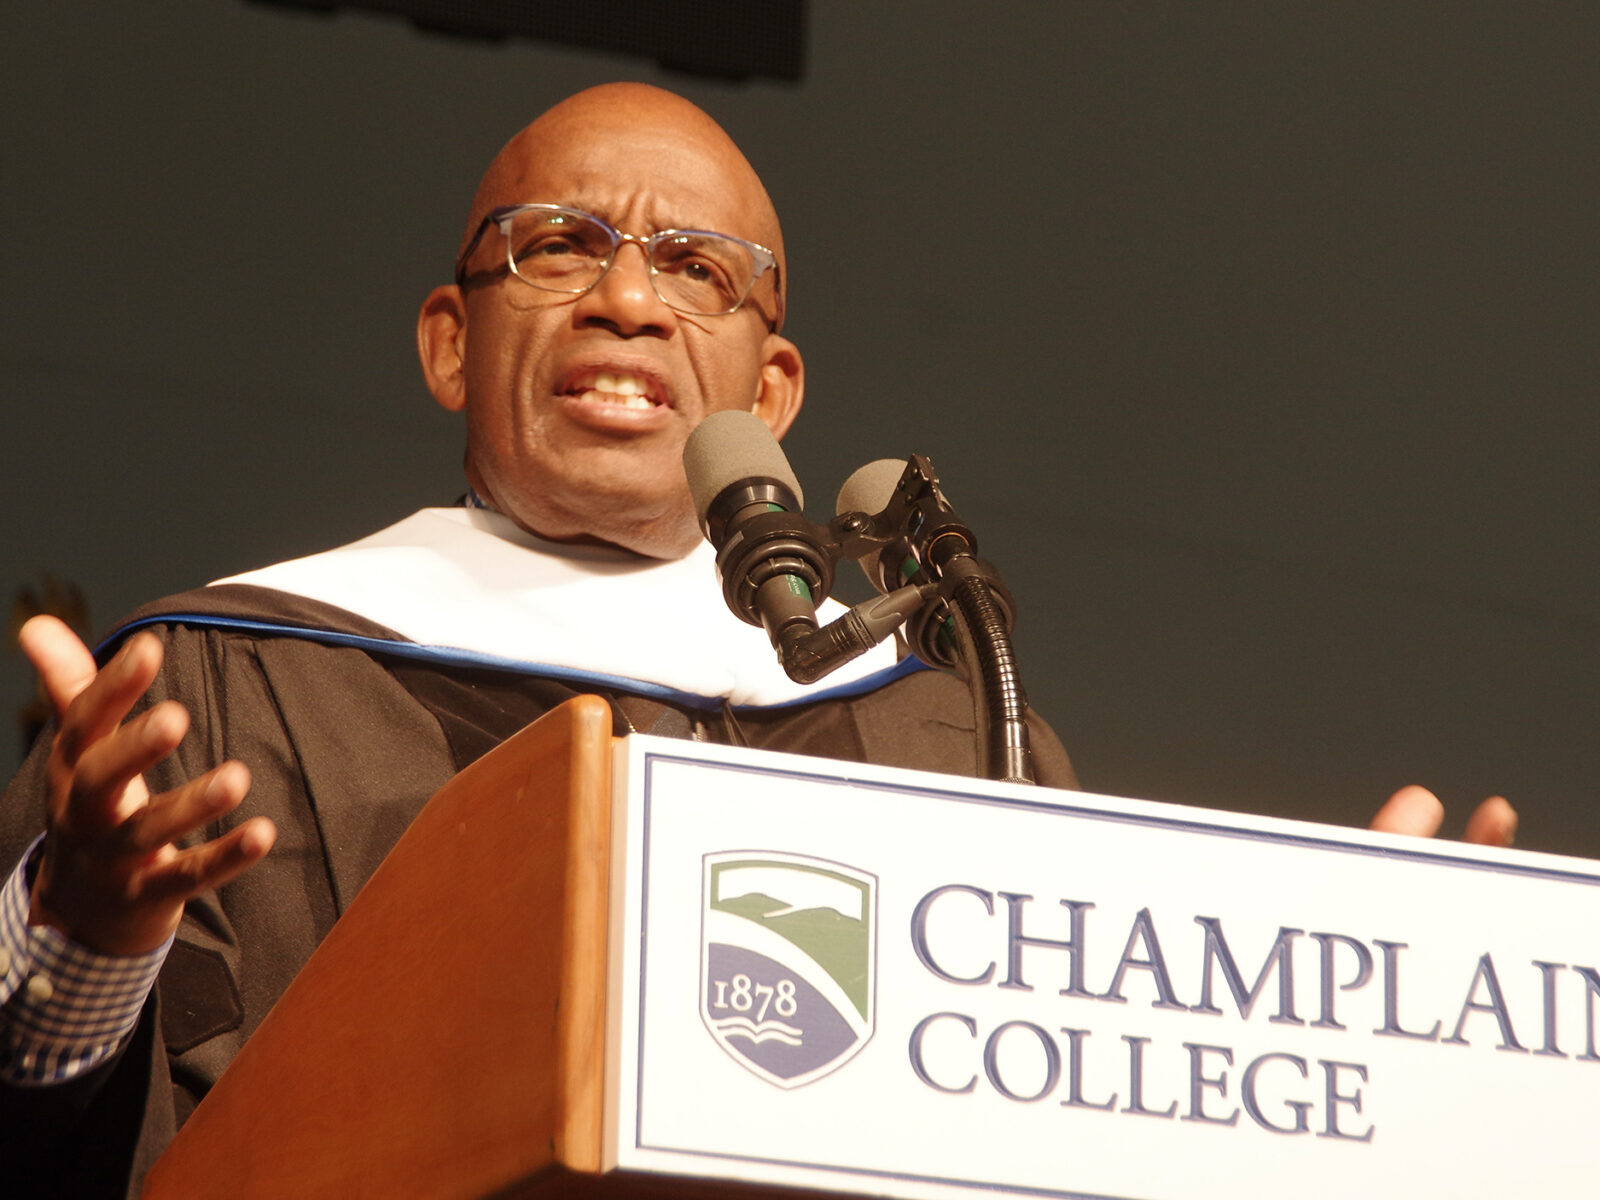 Al Roker addressing Champlain College commencement upon being awarded an honorary doctorate.